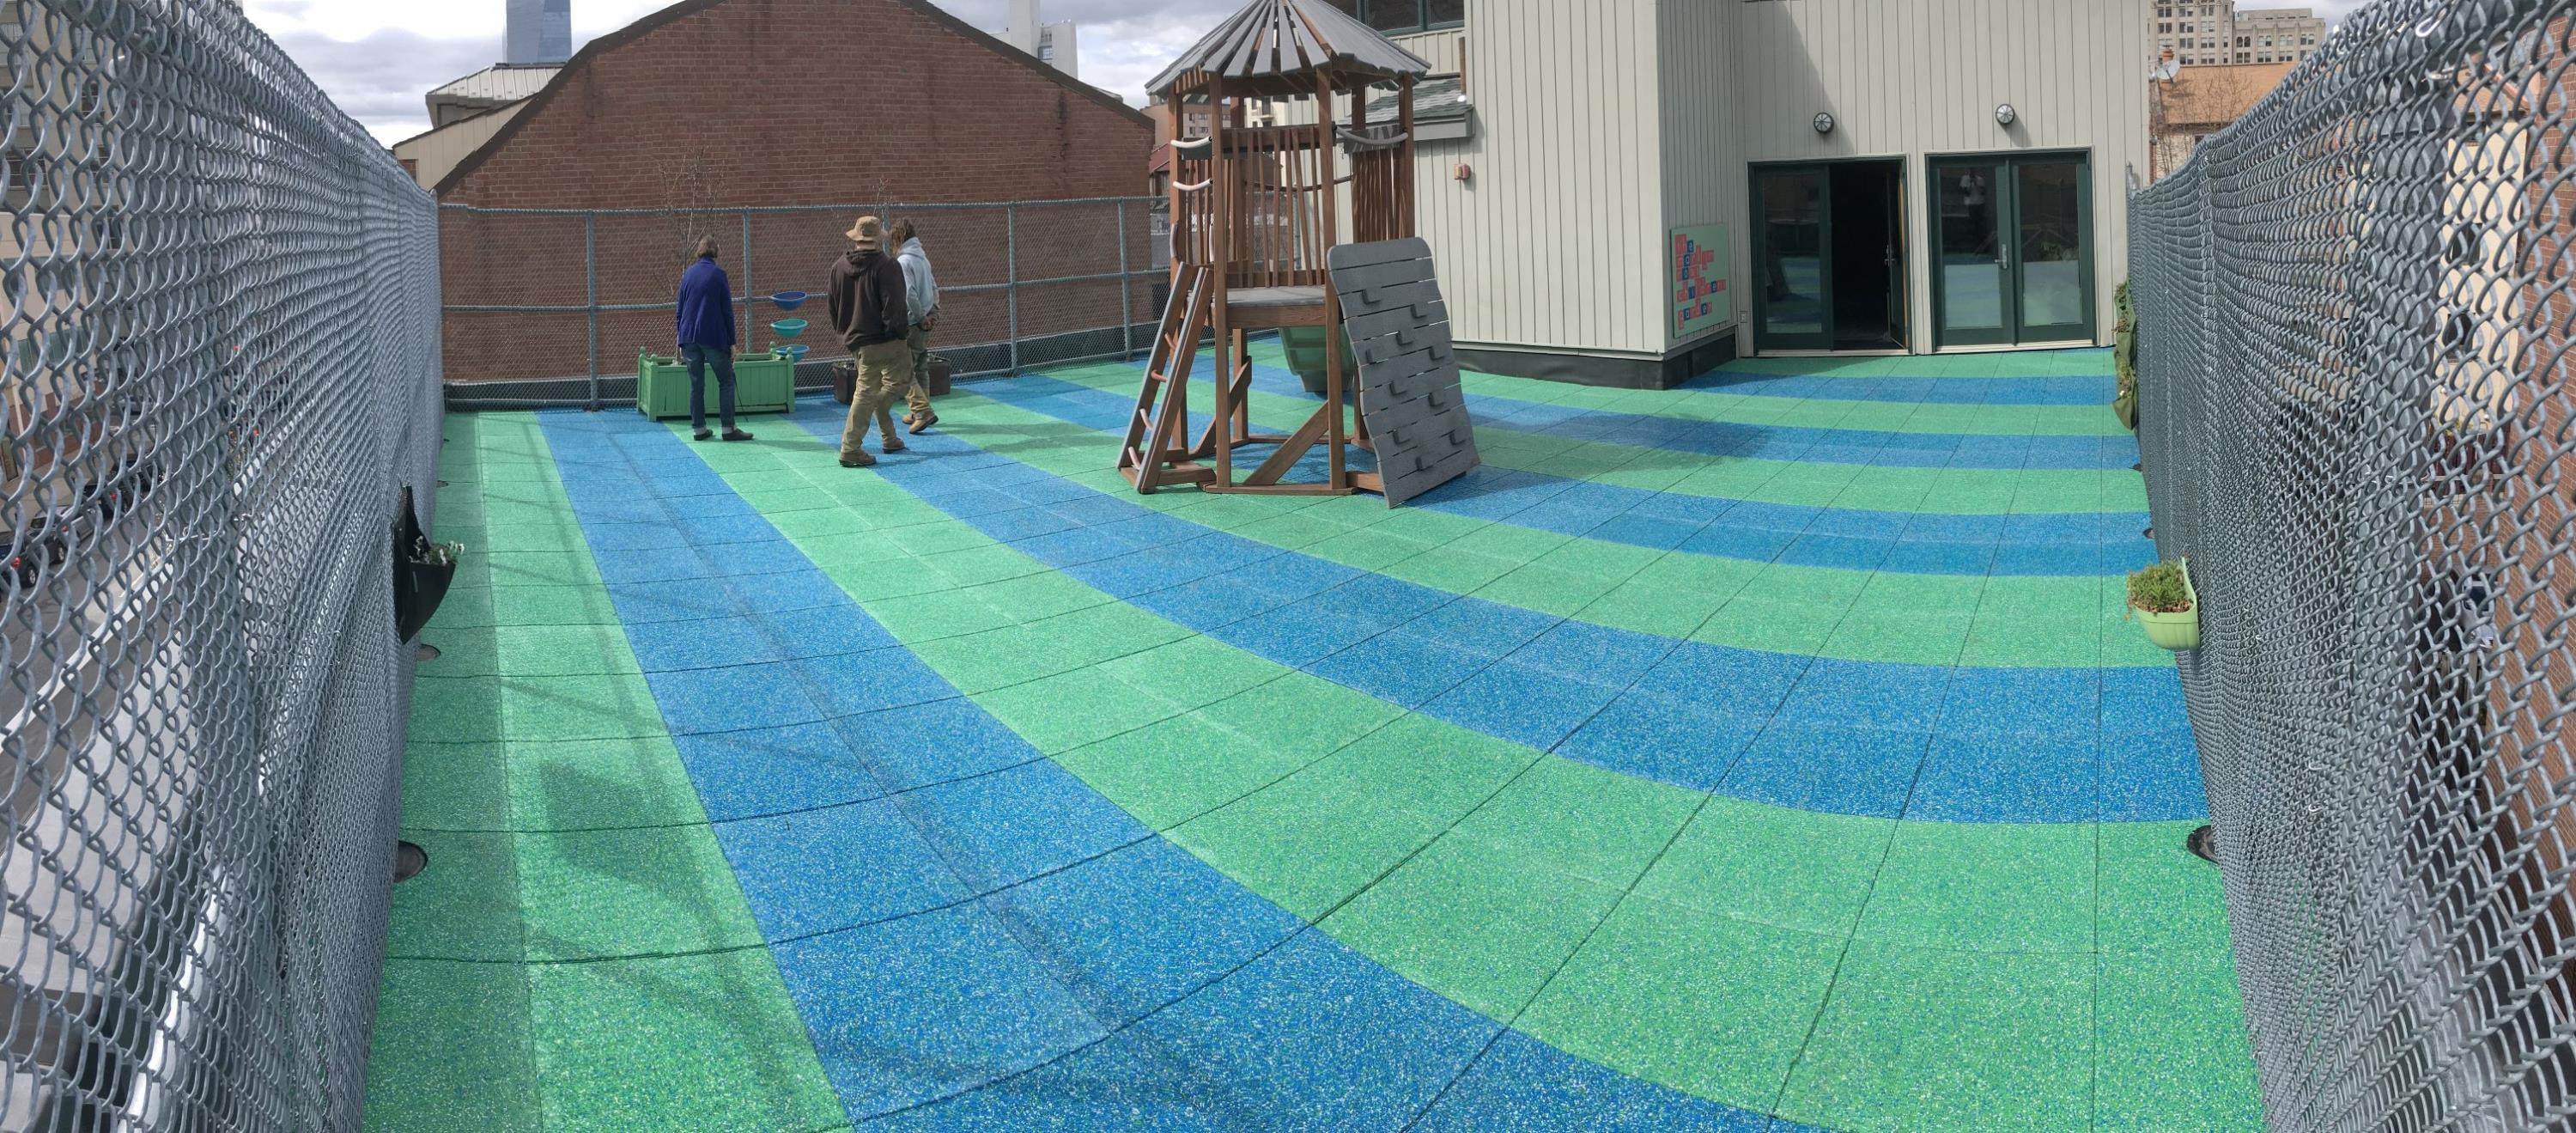 Rooftop Playground in Philly using custom blended TPV top pavers